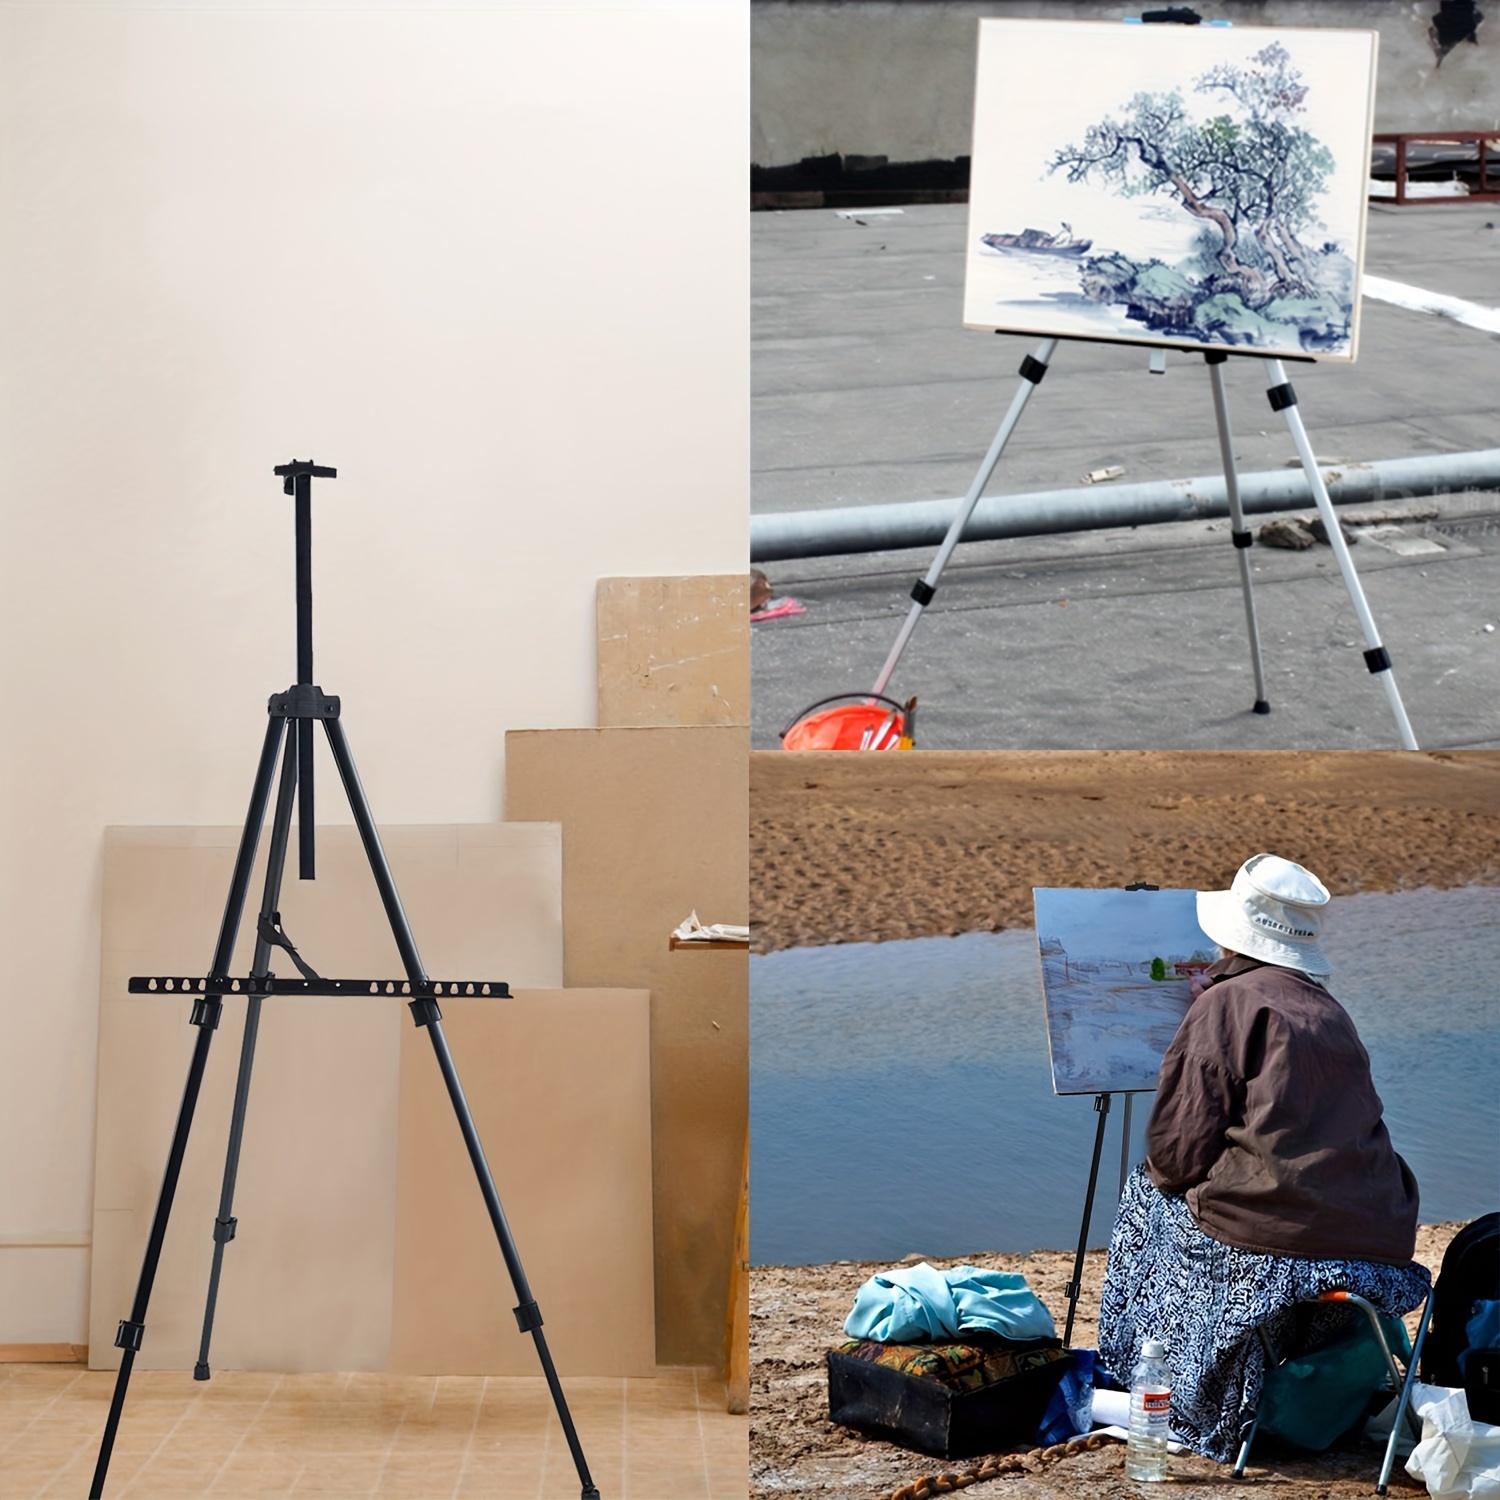 Portable Artist Easel Stand Adjustable Height Painting Easel